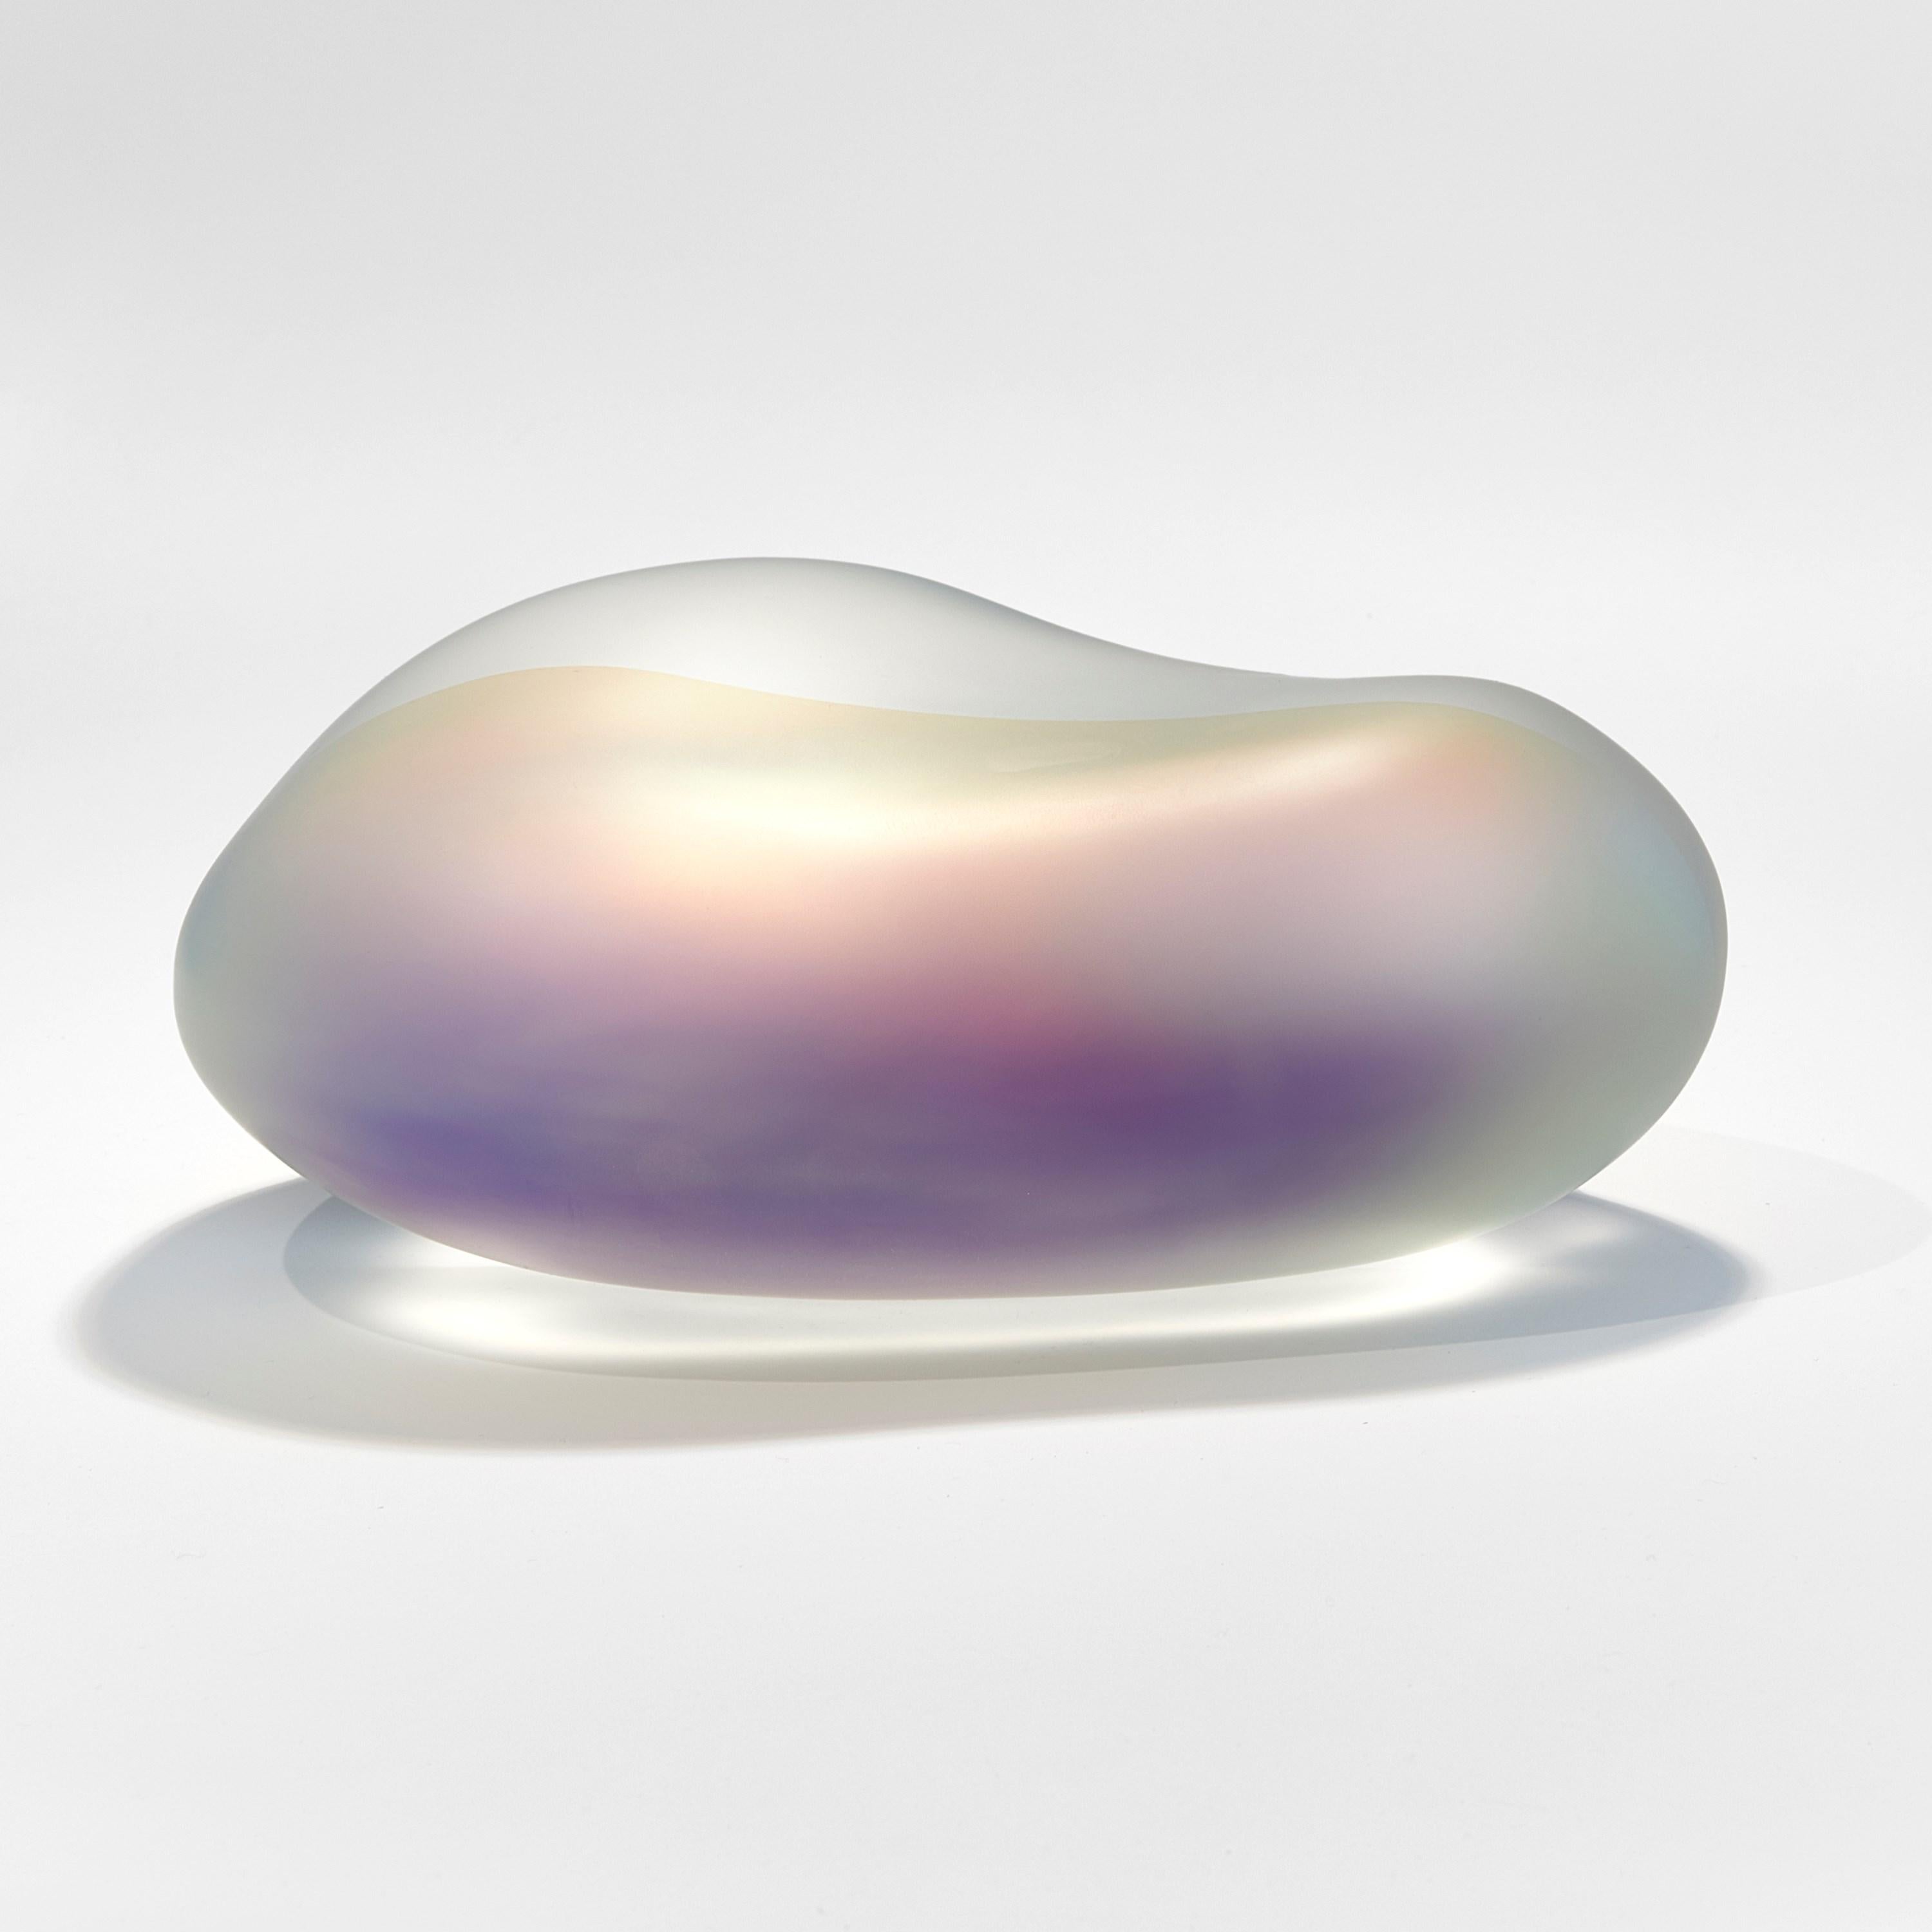 'Moon-rock 010' is a unique sculpture by the British artist, Jon Lewis, created from cast glass with dichroic filters. 

Lewis’ first introduction to glassmaking was in 1989 at Wolverhampton University, where he instantly fell in love with glass as